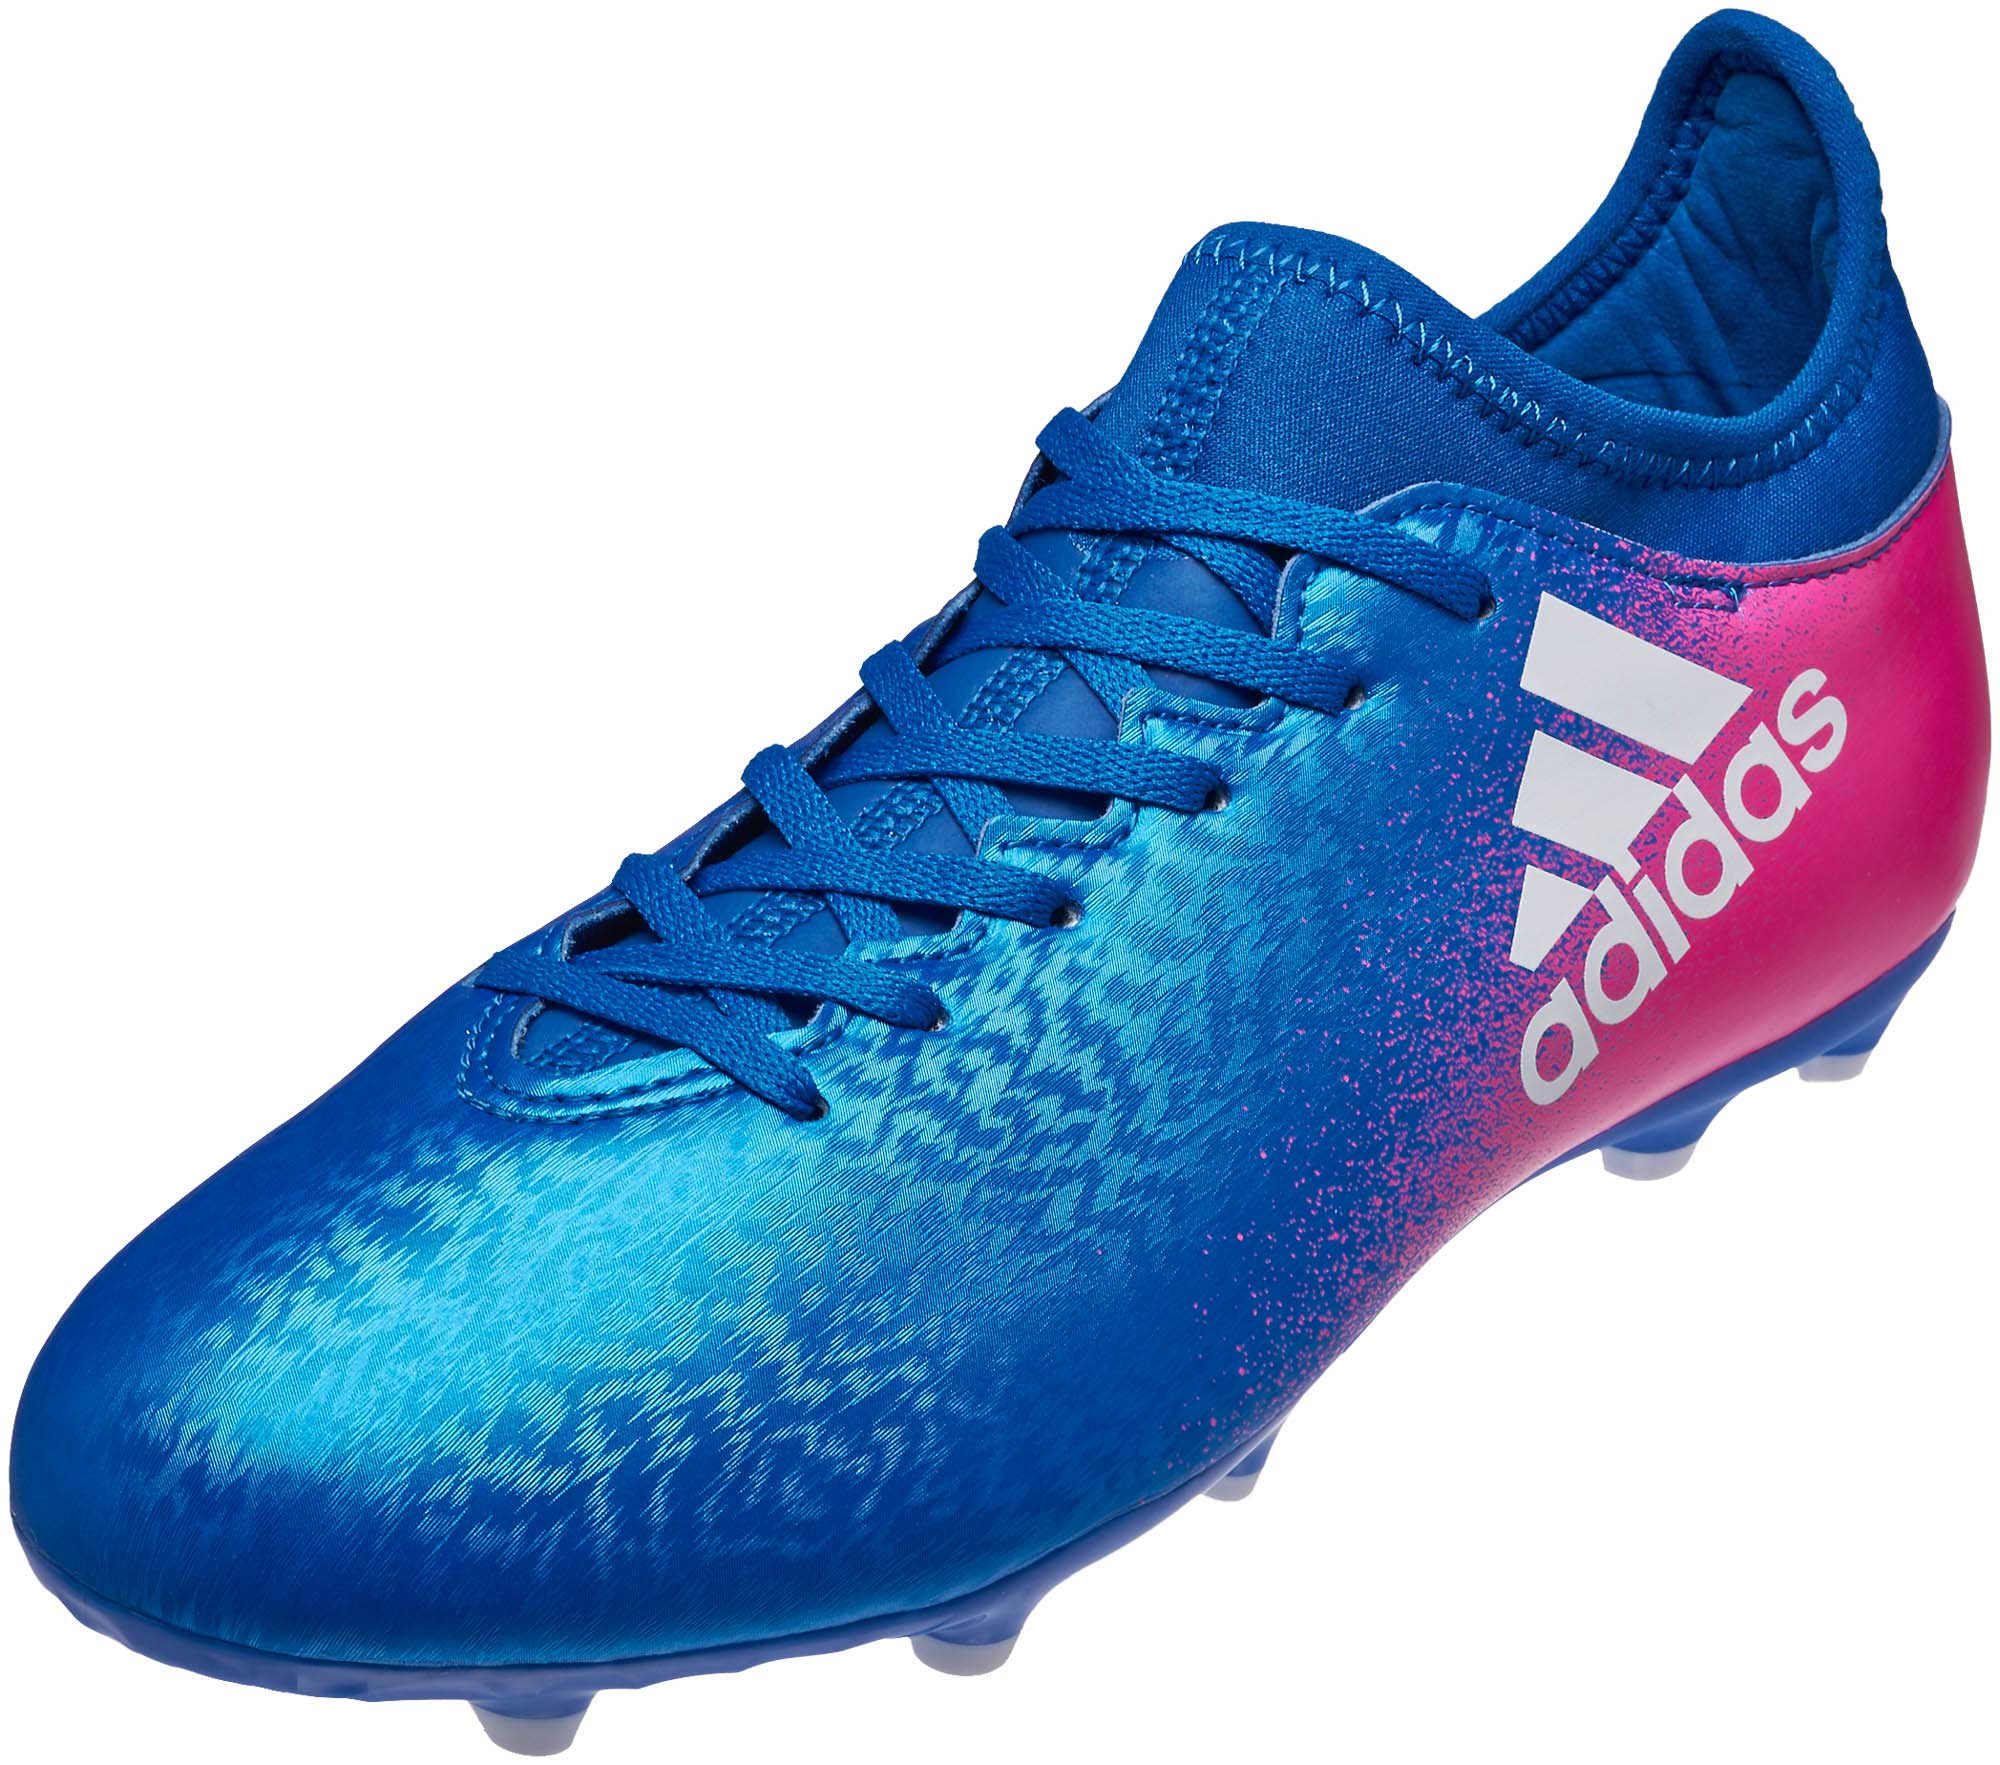 adidas blue soccer shoes